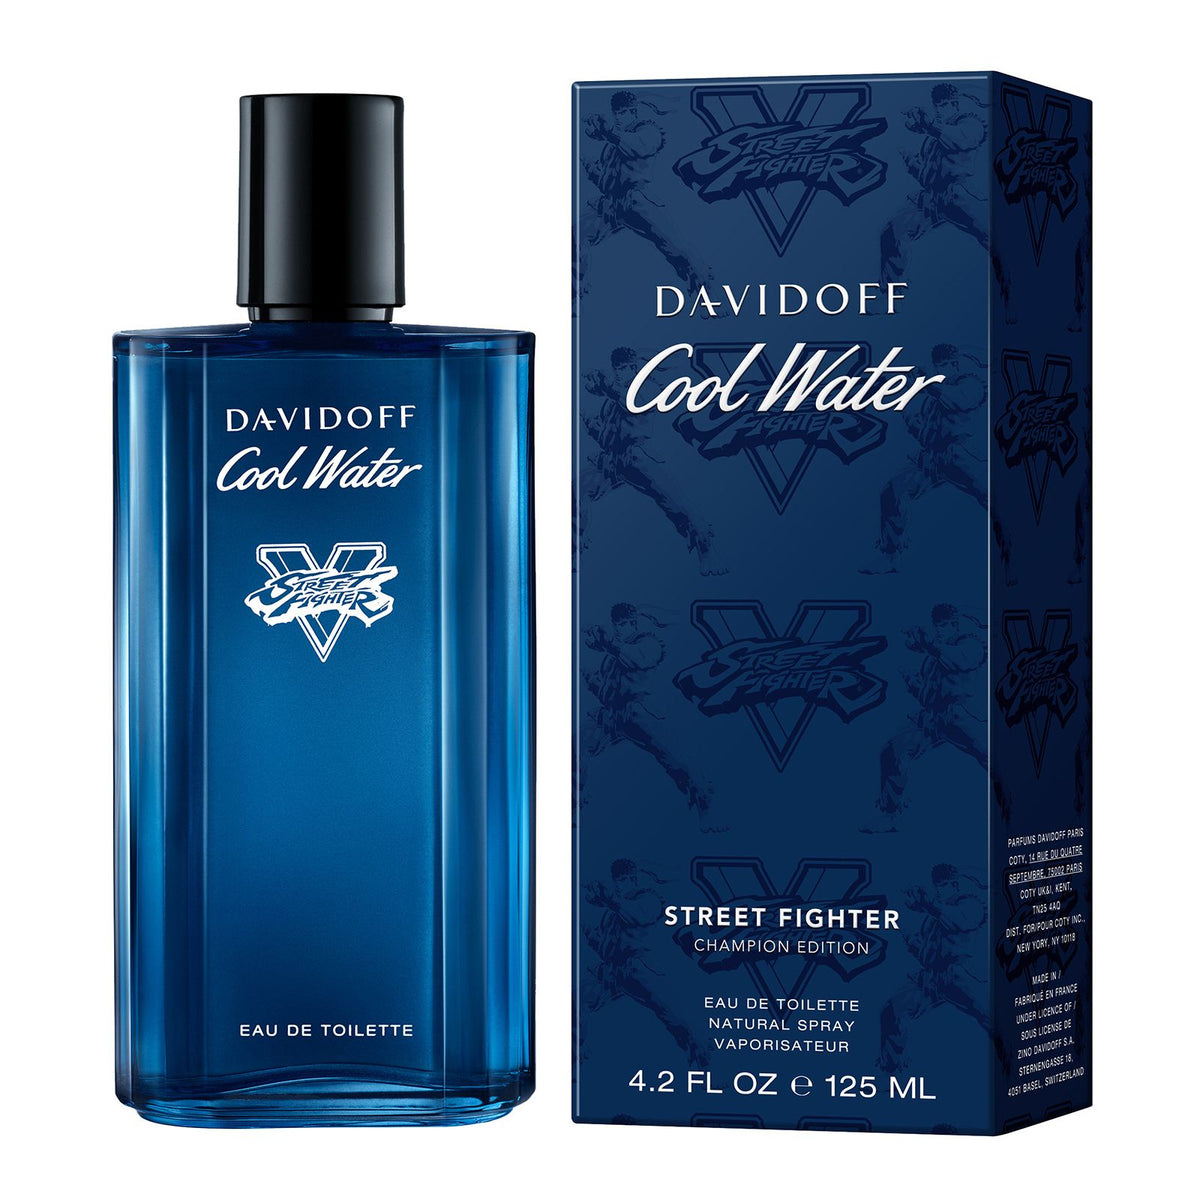 Cool water "Street Fighter" (Champion Edition) By Davidoff for Men - EDT , 125ml